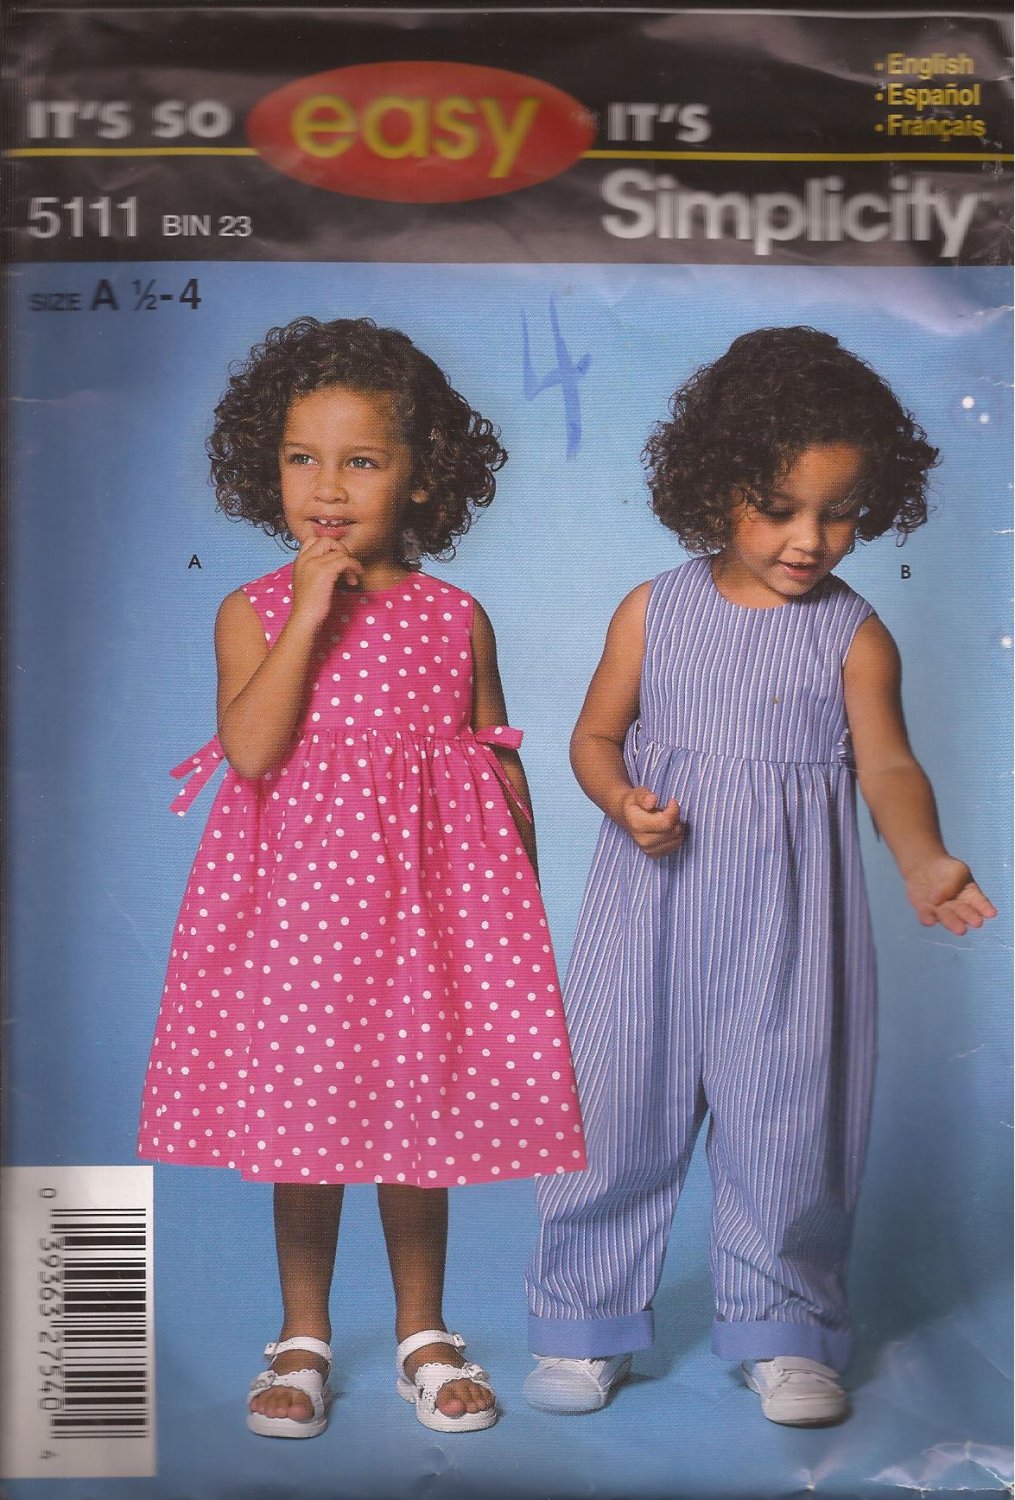 Simplicity 5111 (2004) Toddler Girls Dress Romper Pattern Size 1/2 1 2 3 CUT to 3